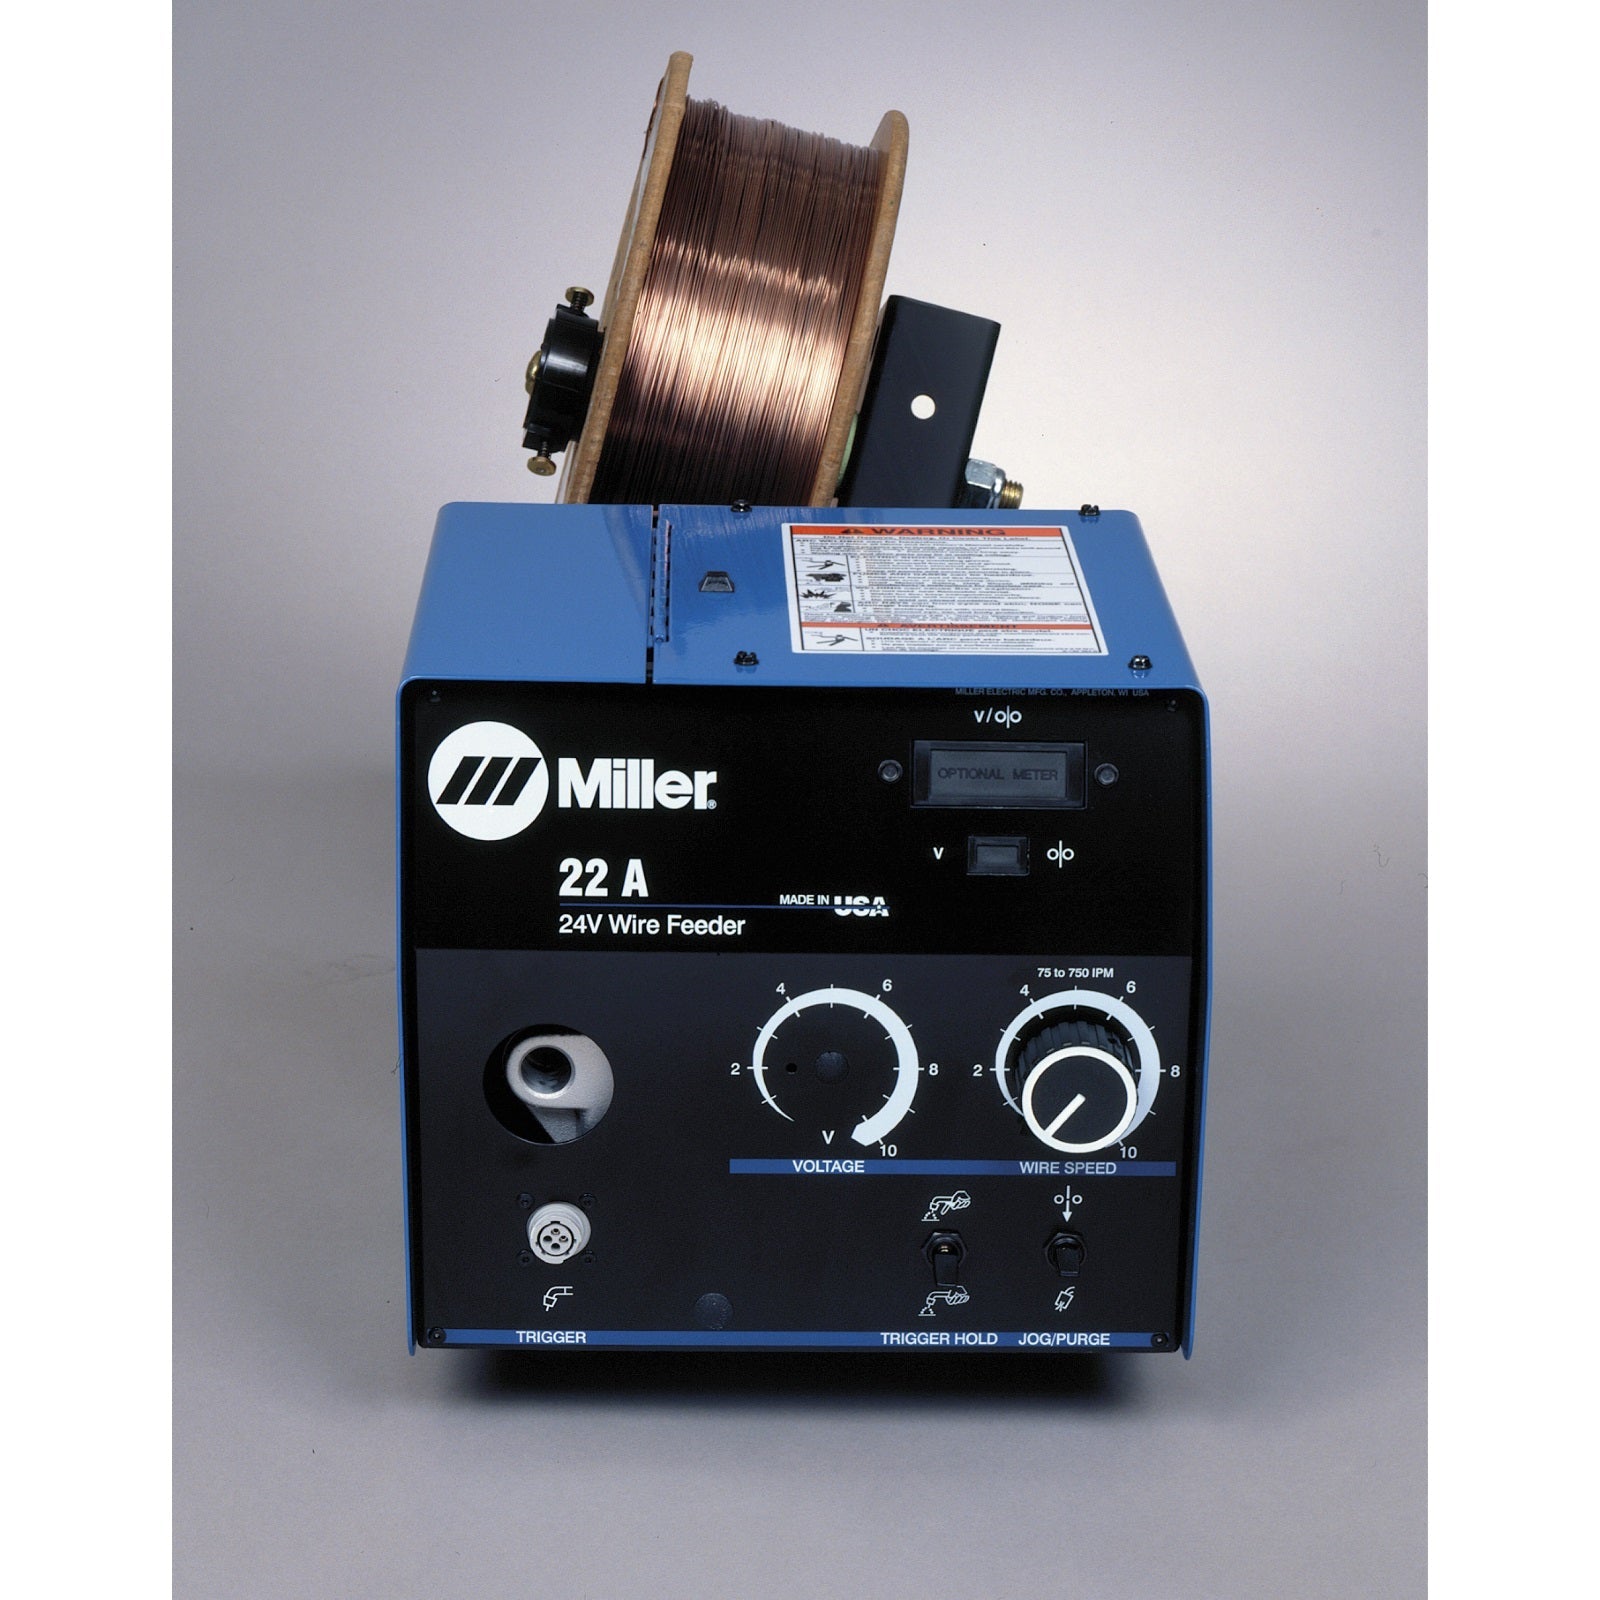 Miller 22A Wire Feeder with Digital Display and Voltage Control (951192)